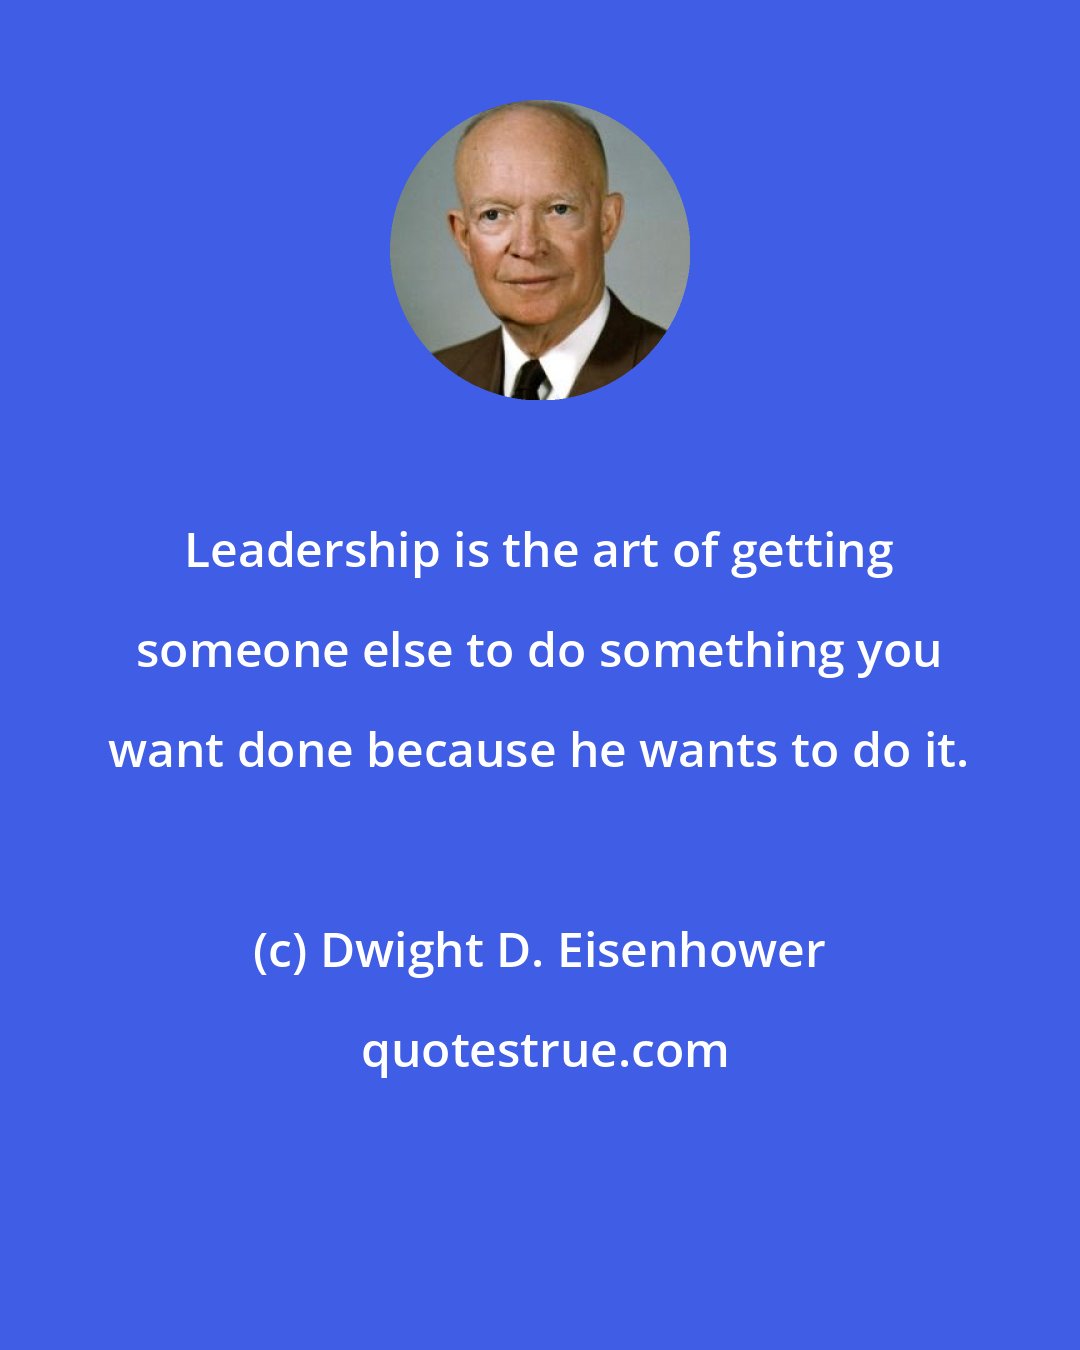 Dwight D. Eisenhower: Leadership is the art of getting someone else to do something you want done because he wants to do it.